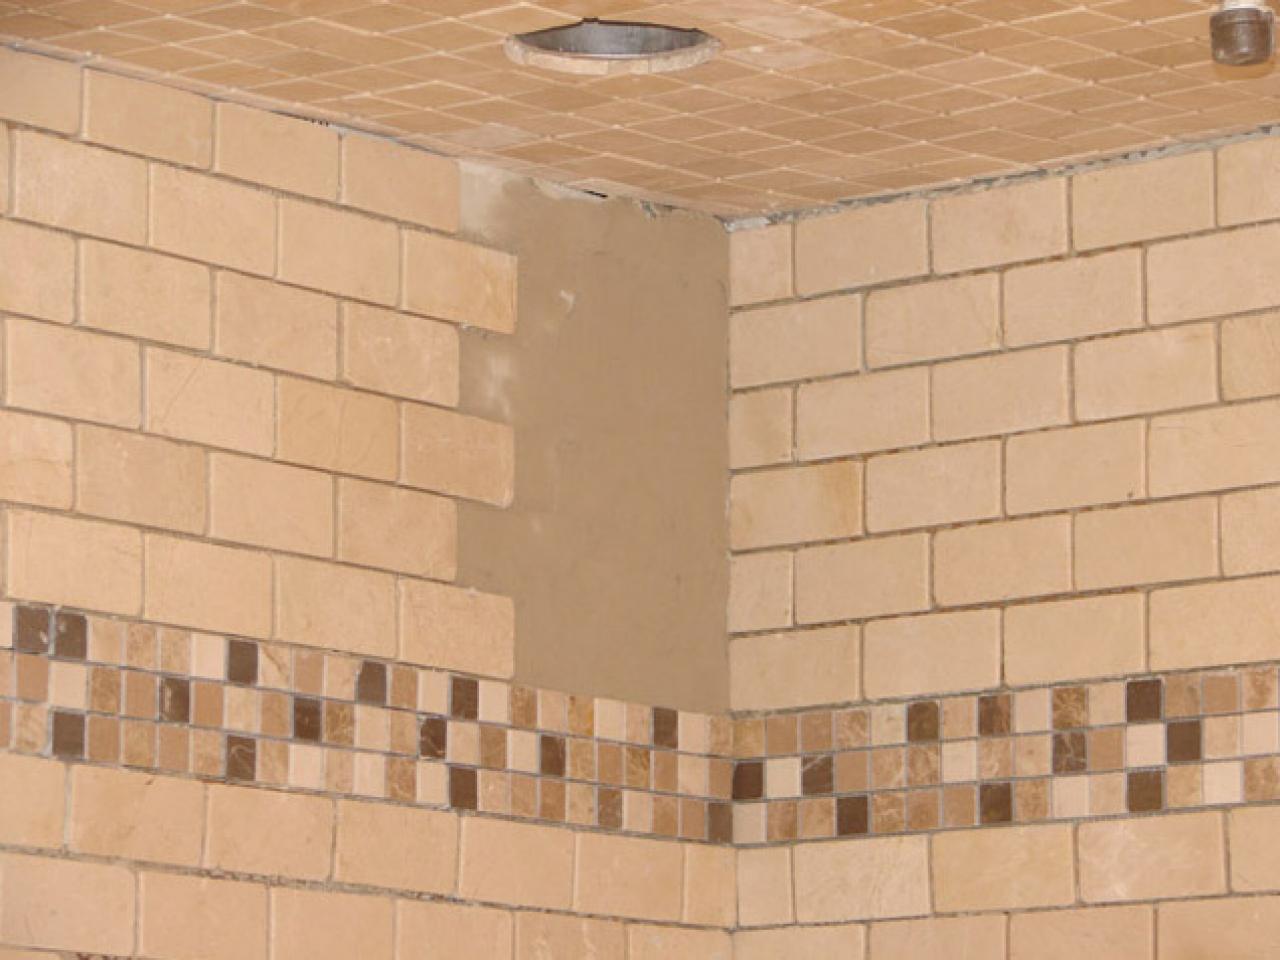 To Install Tile In A Bathroom Shower, Laying Bathroom Tile